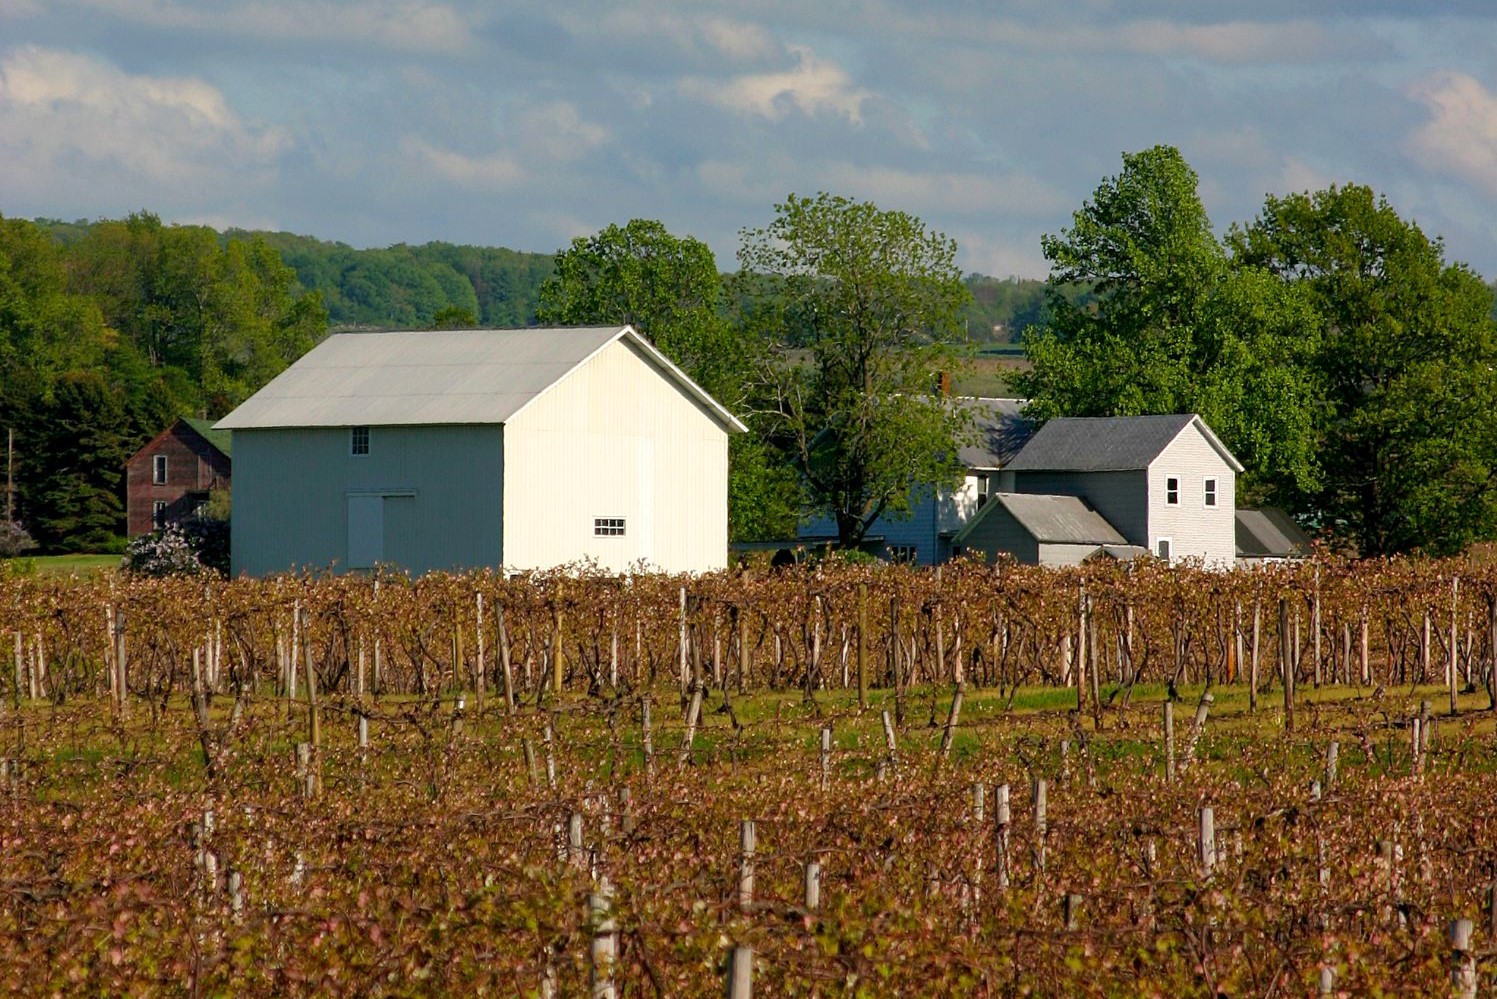 Farmhouse and vineyards in Western NY